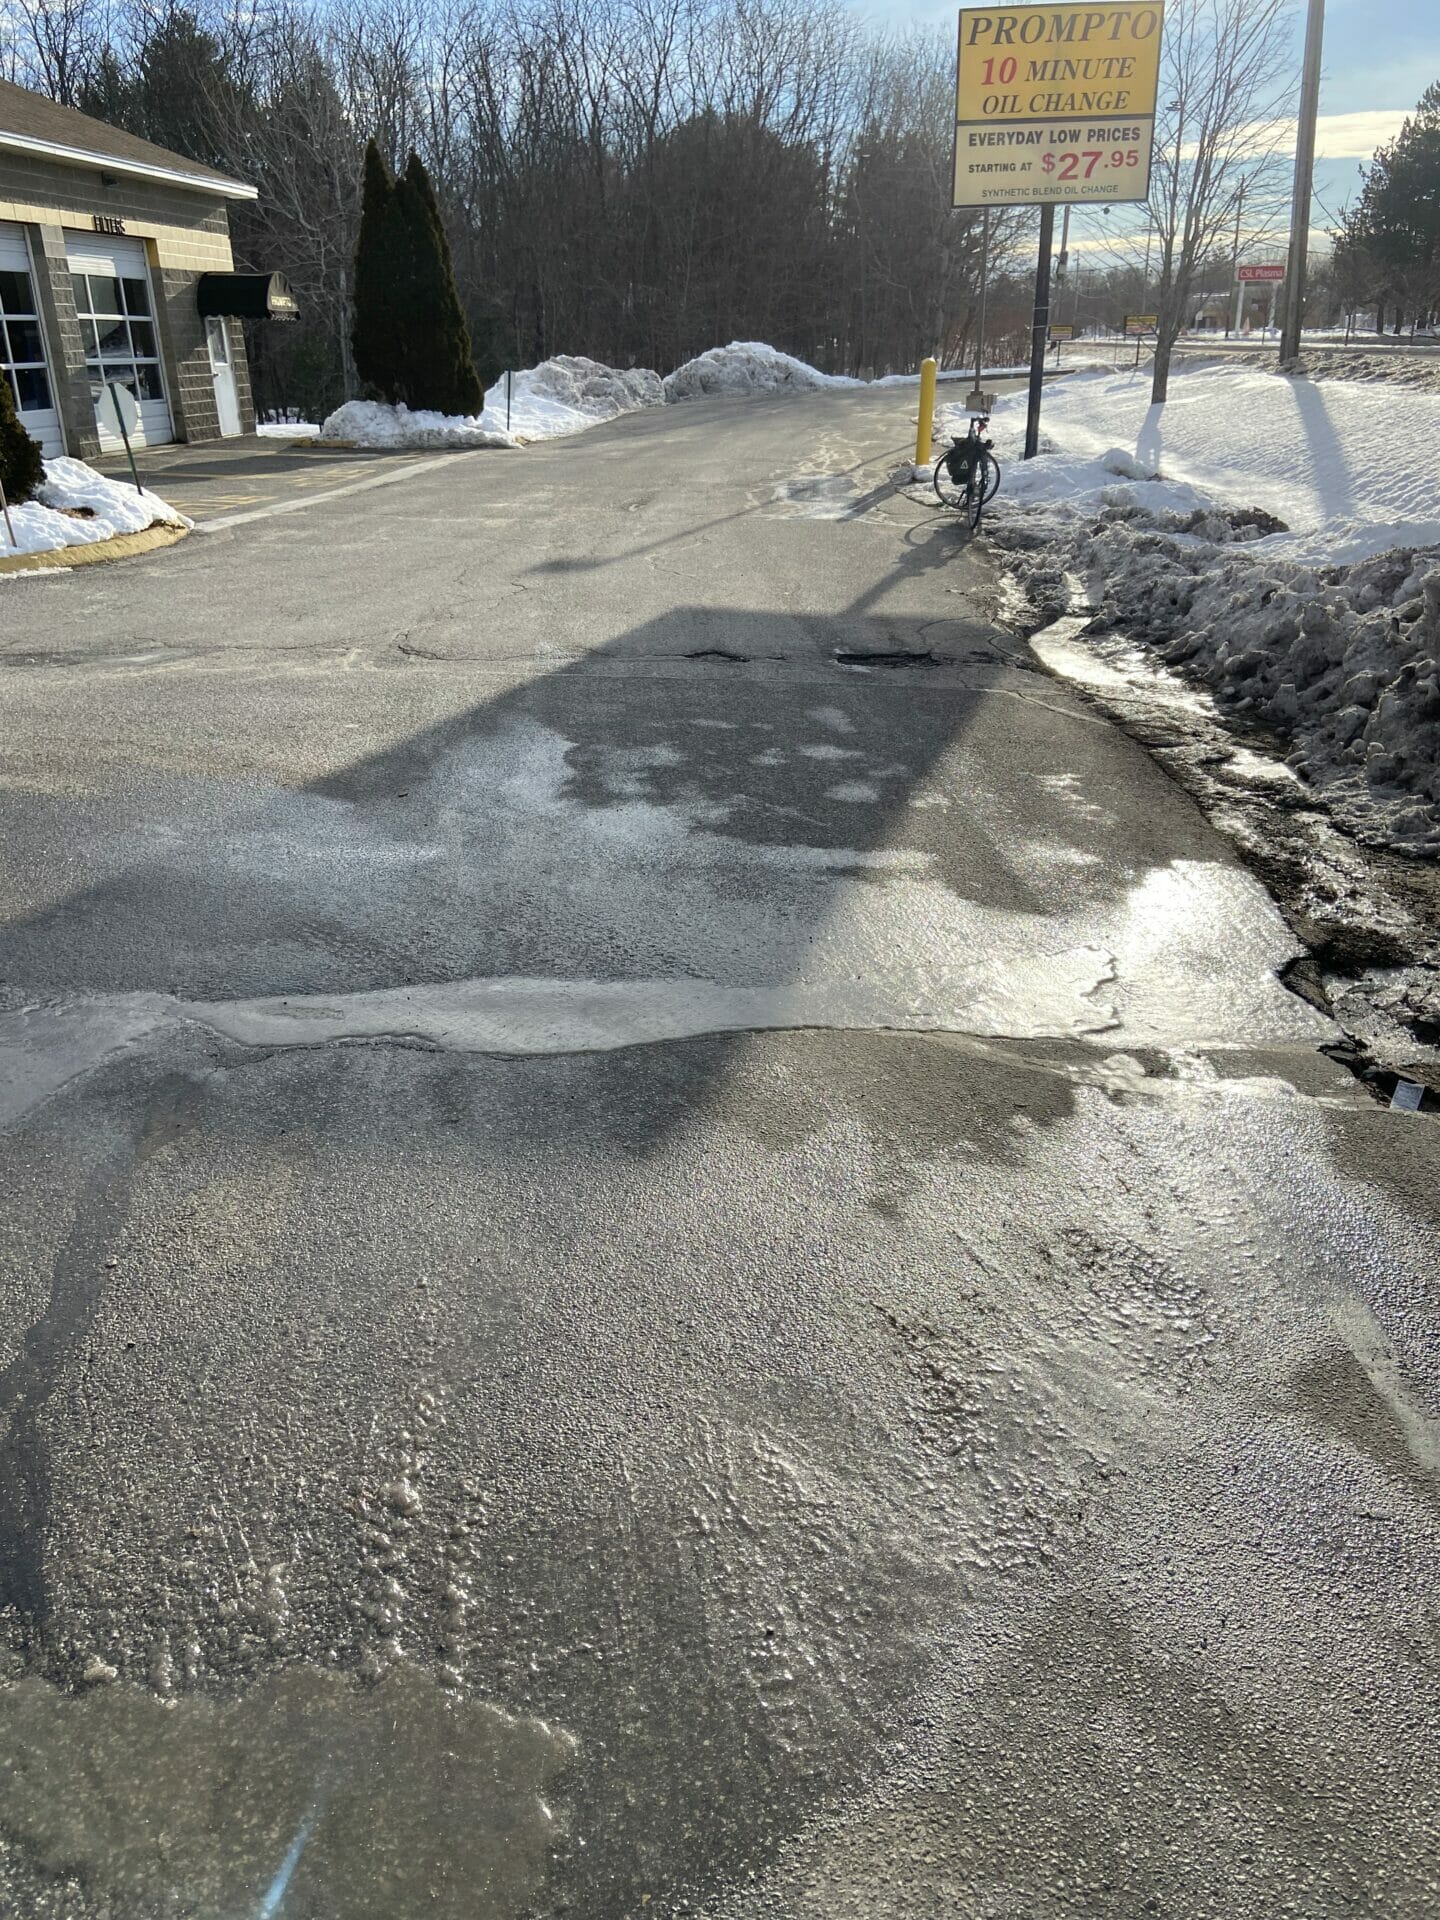 Ice covering entire right-hand lane of two-lane street